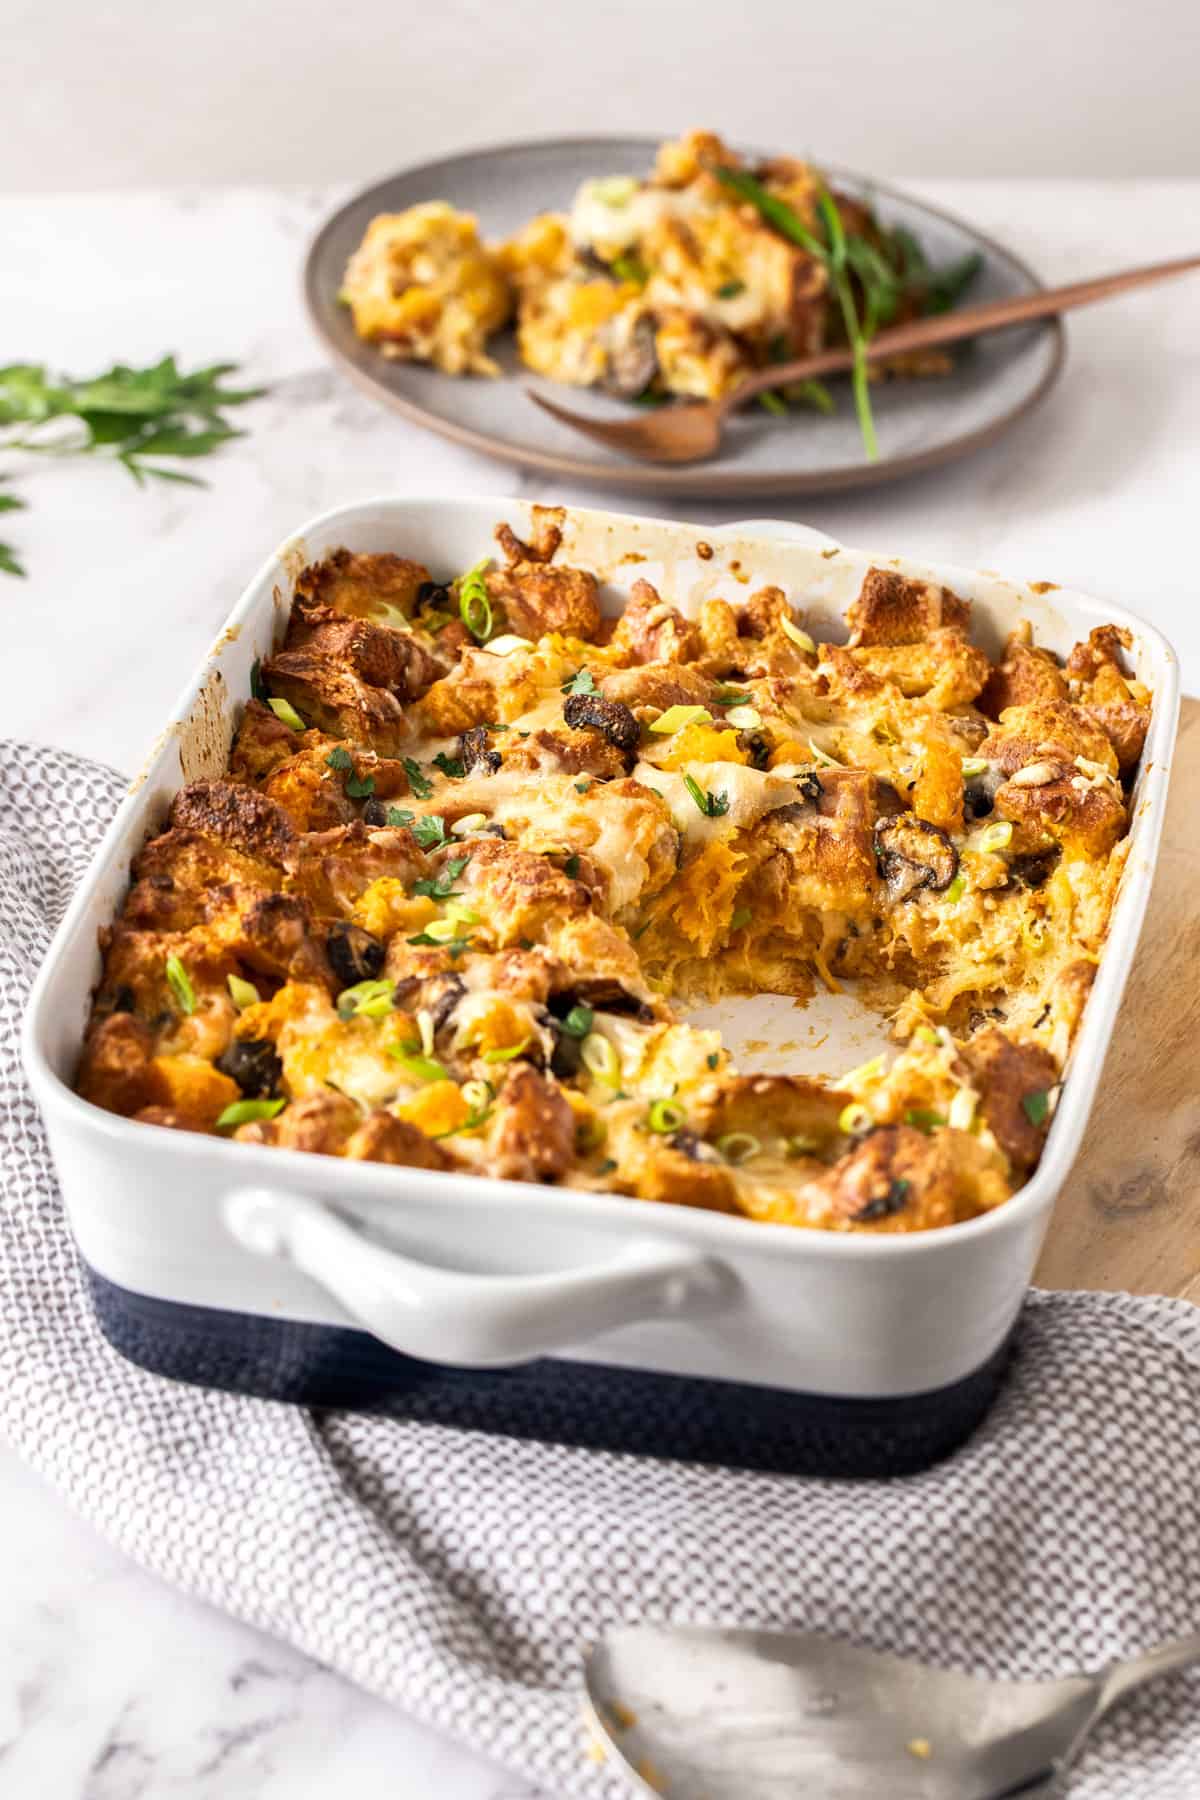 A pan of savory bread pudding with a serving taken out of it.